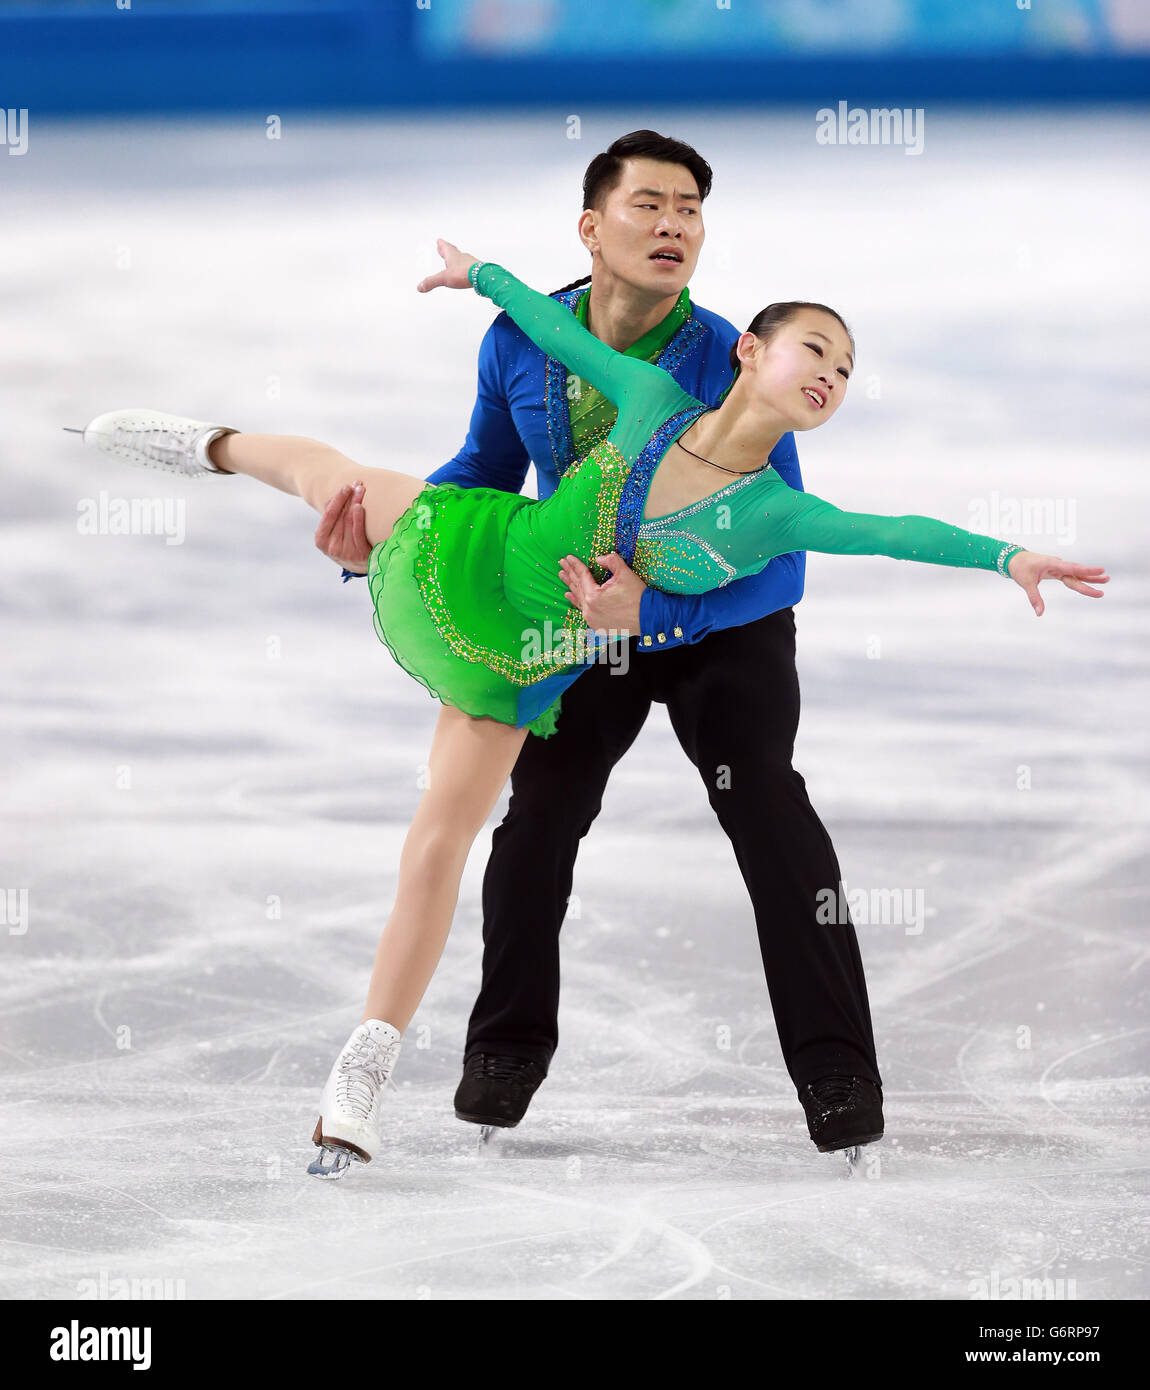 China's Cheng Peng and Hao Zhang . during the pairs short program of figure skating event during the 2014 Sochi Olympic Games in Sochi, Russia. PRESS ASSOCIATION Photo. Picture date: Tuesday February 11, 2014. See PA story OLYMPICS . Photo credit should read: David Davies/PA Wire. RESTRICTIONS: For news services only. Editorial purposes only. No video emulation. Stock Photo